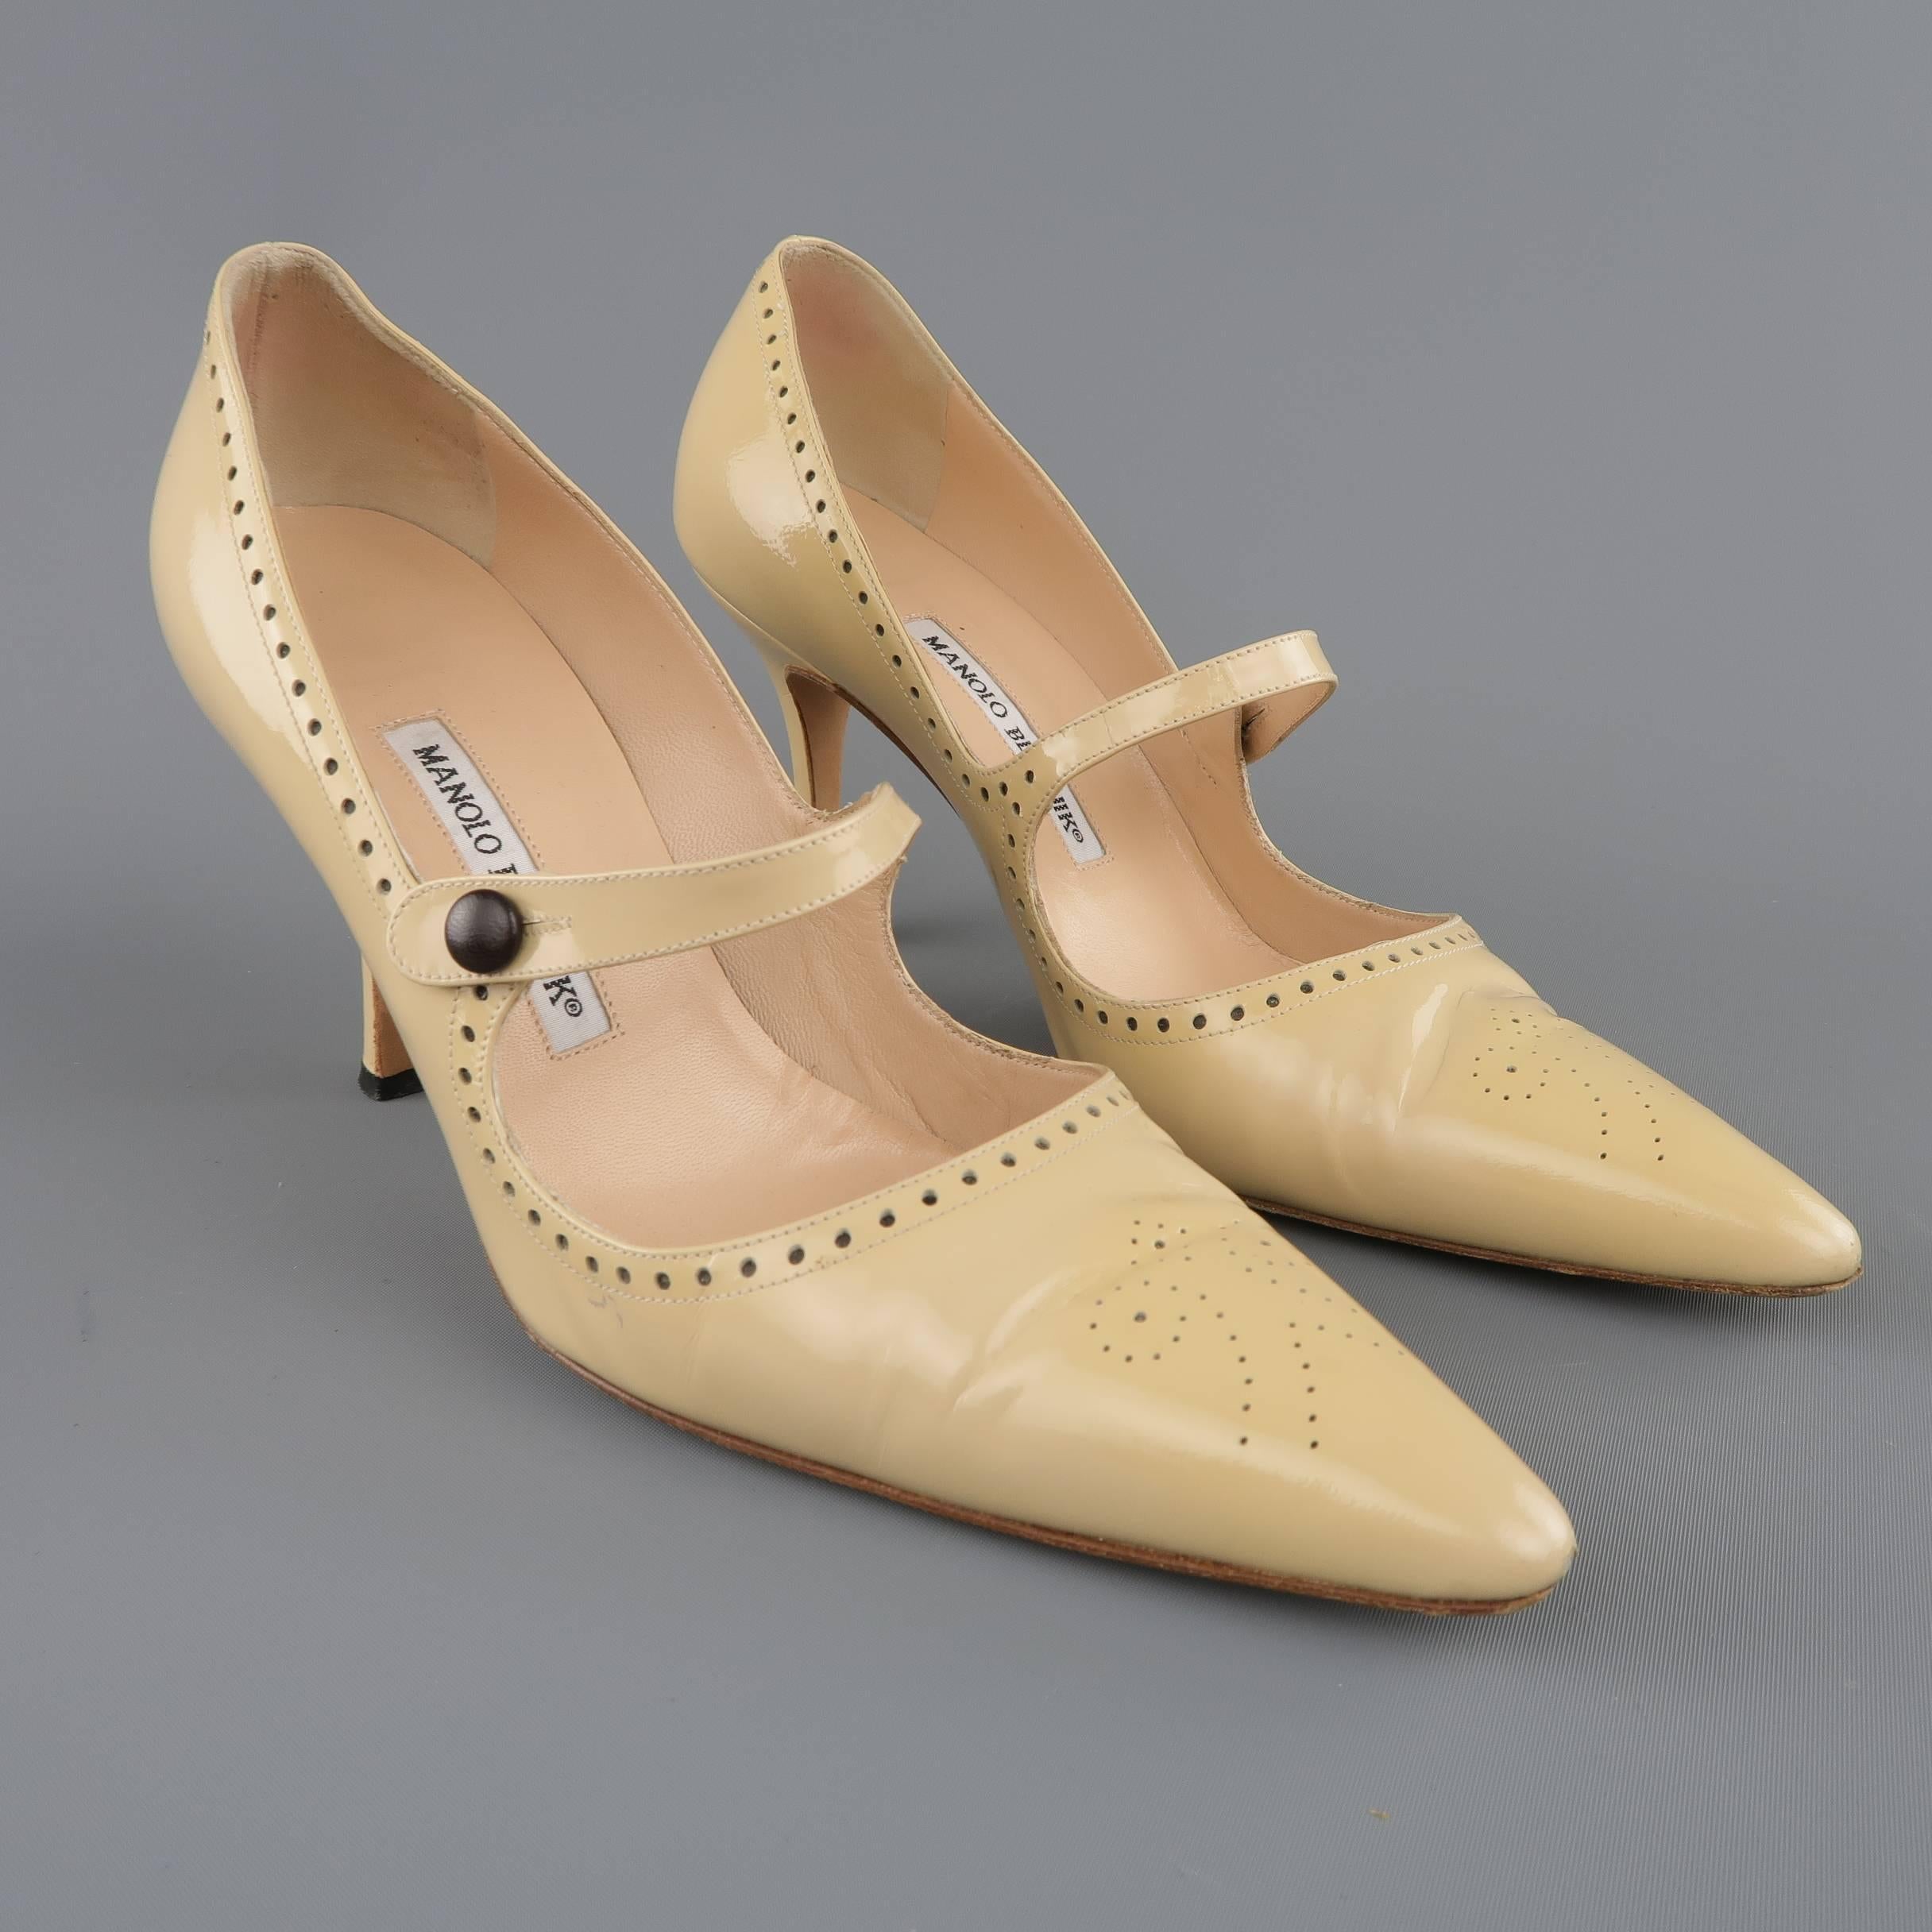 MANOLO BLAHNIK pumps come in light beige patent leather and feature a pointed toe with perforated brogue detail, covered stiletto heel, Mary Jane strap, and perforated trim. With box. Made in Italy.
 
Good Pre-Owned Condition.
Marked: IT 38.5
